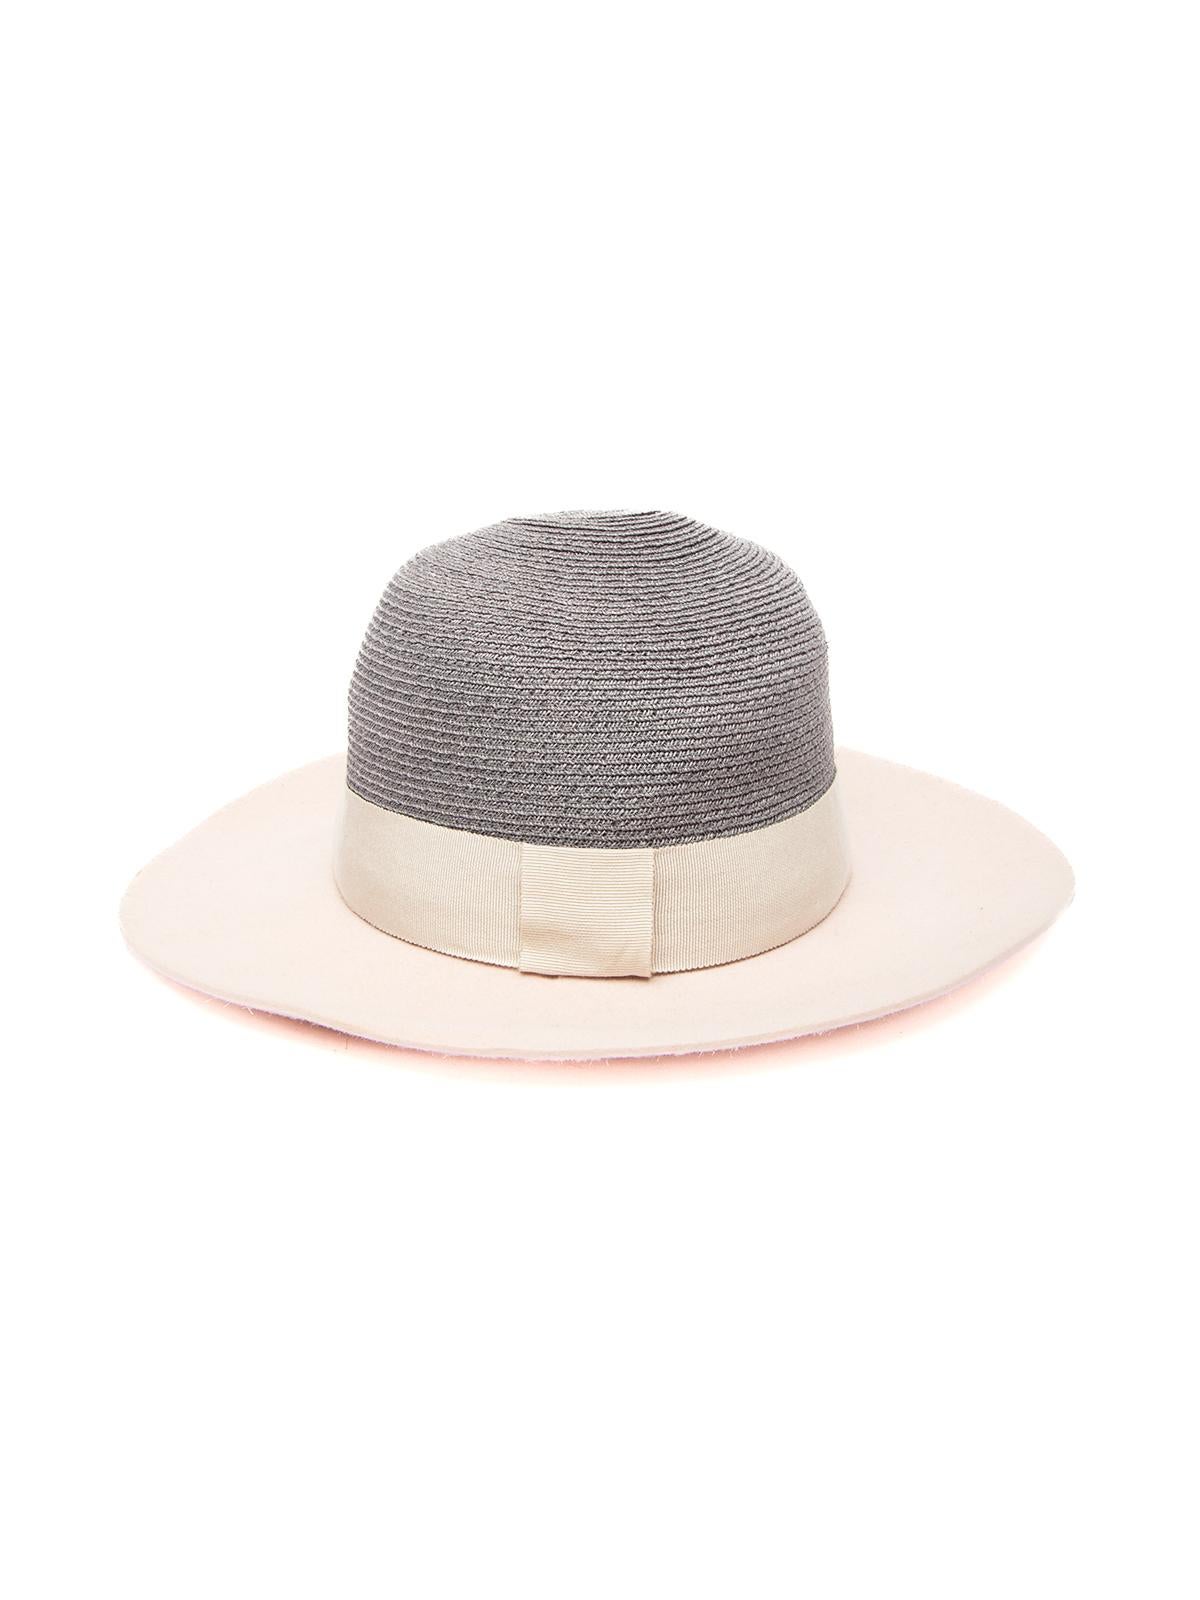 CONDITION is Good. Wear to hat is evident. Wear to exdges suede evident on this used designer Maison Michelle resale item. Details Grey, pink Suede, Rafia White ribbon with iconic M logo Made in France Size & Fit Product measurements: L Inner